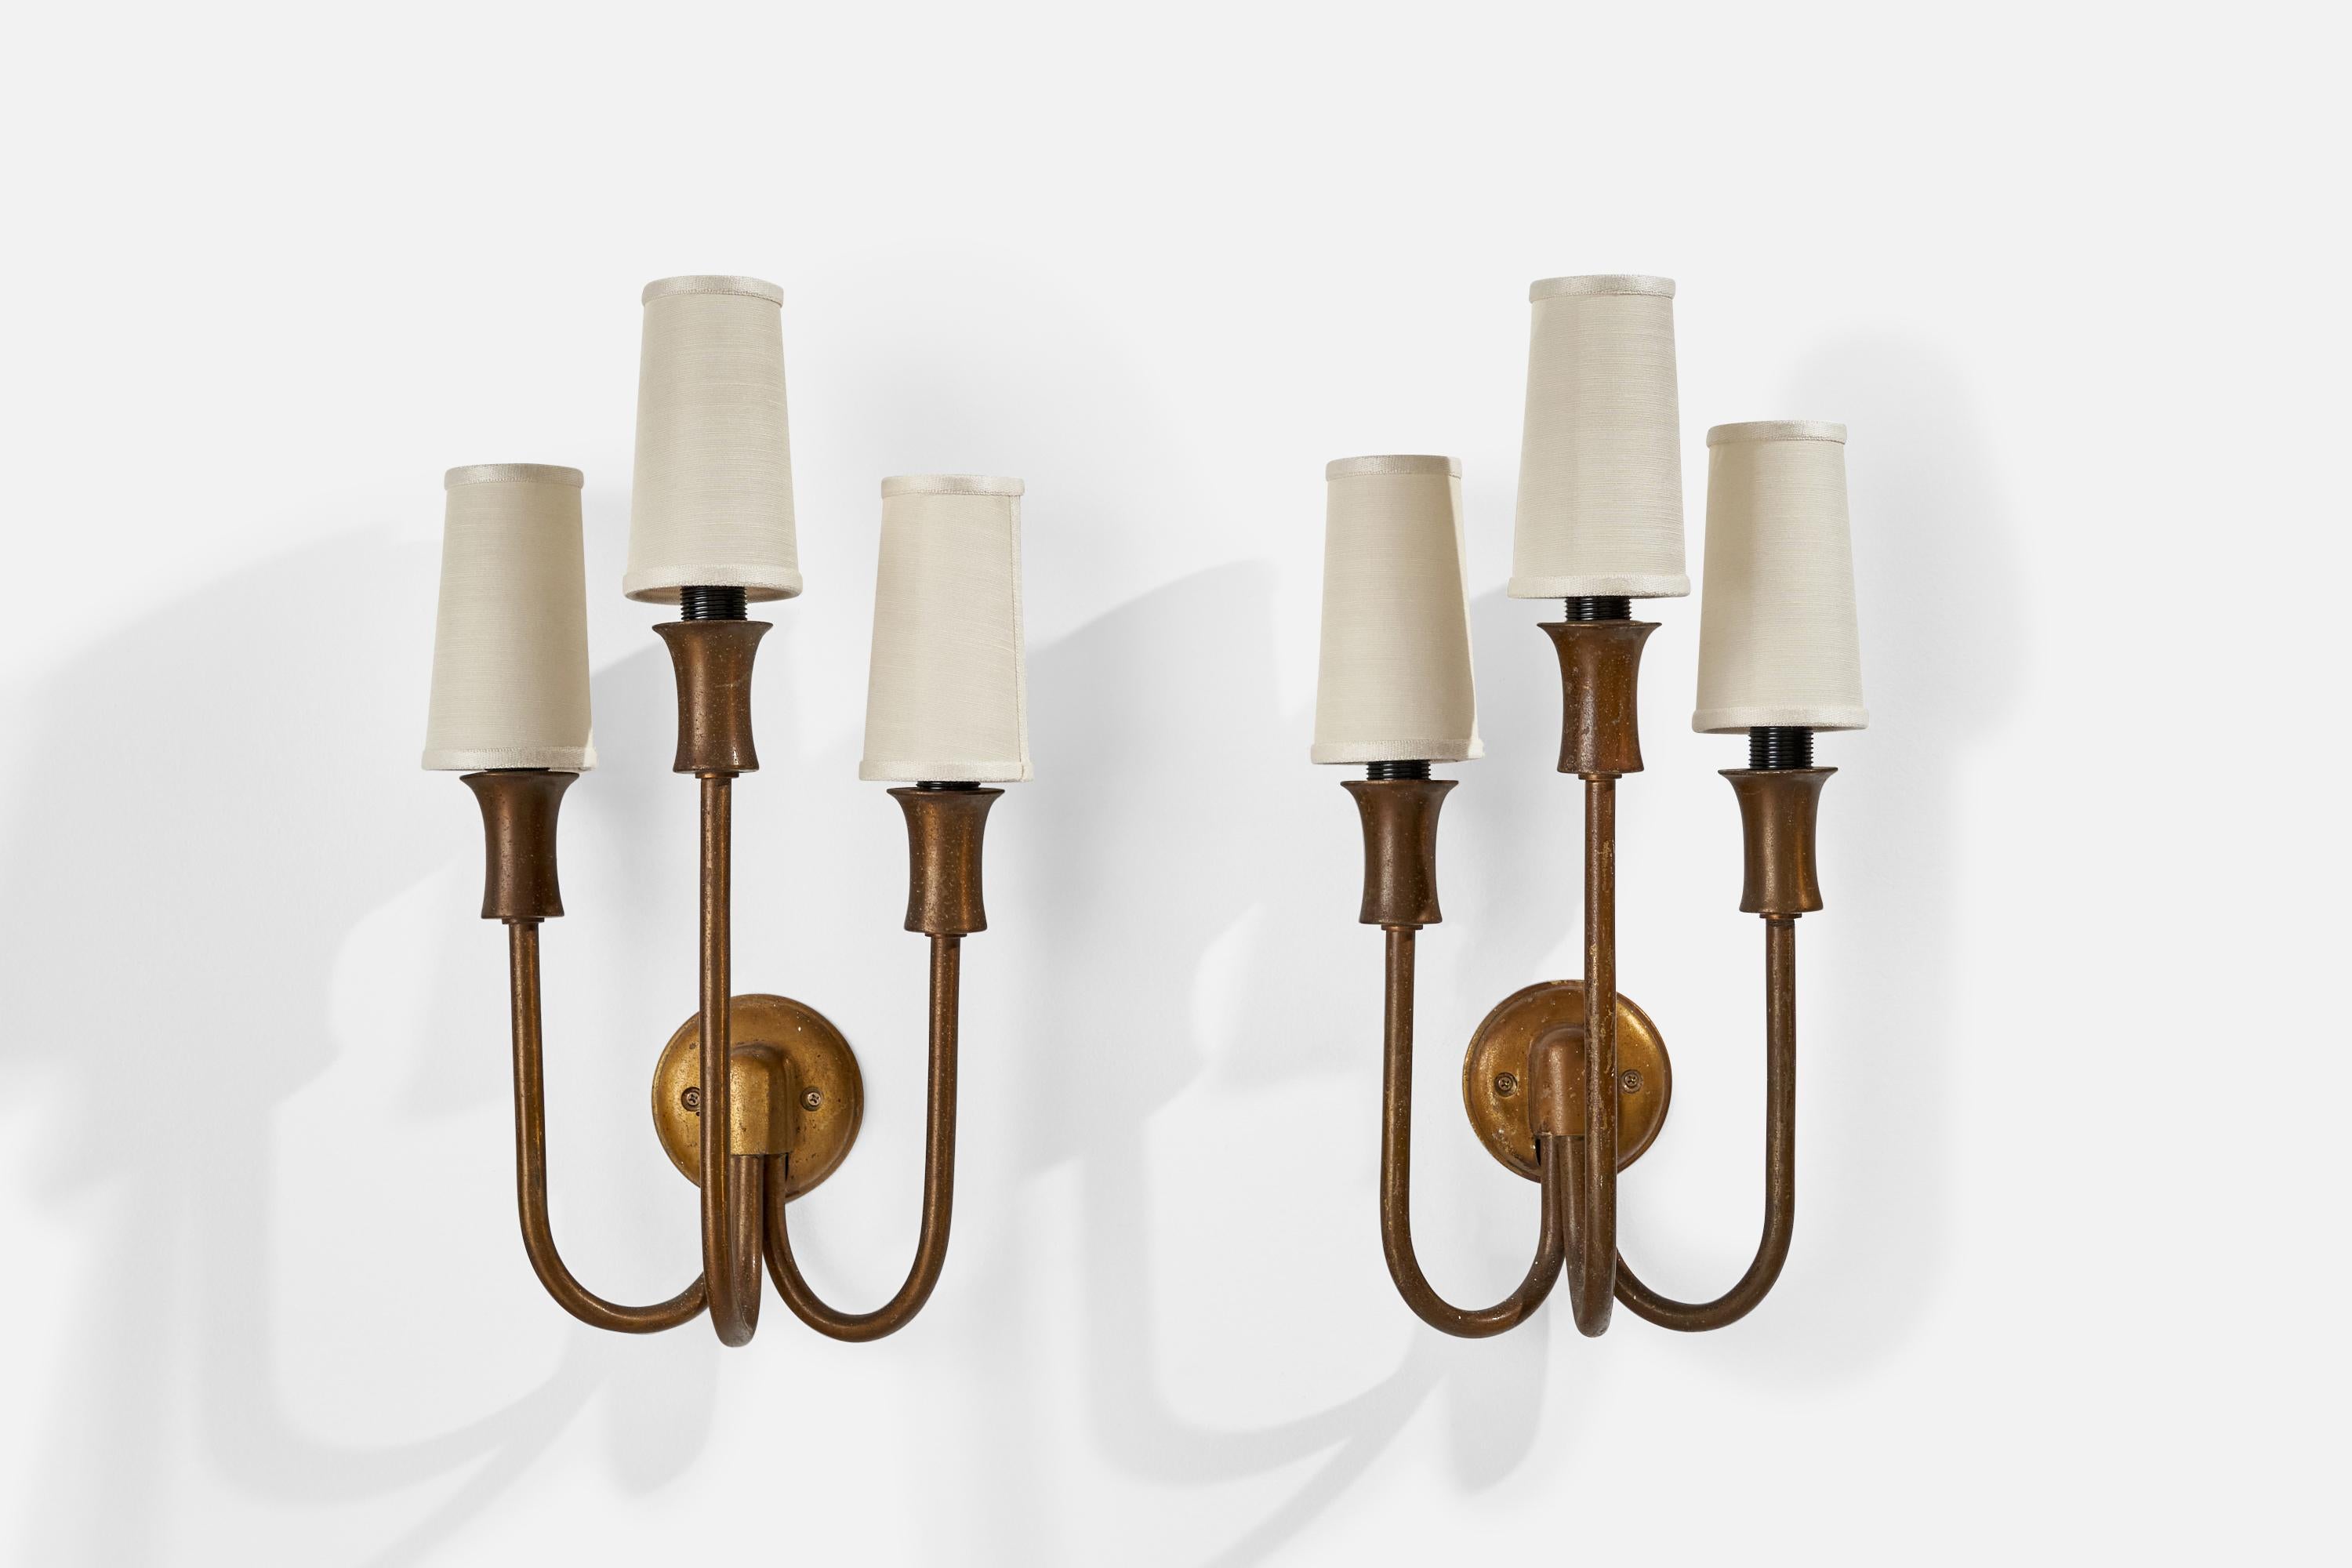 A pair of three-armed brass and white fabric wall lights designed and produced in Italy, c. 1940s.

Overall Dimensions (inches): 17.5” H x 8.25” W x 8..5” D
Back Plate Dimensions (inches): 3.58” H x 0.50” D
Bulb Specifications: E-12 Bulb
Number of